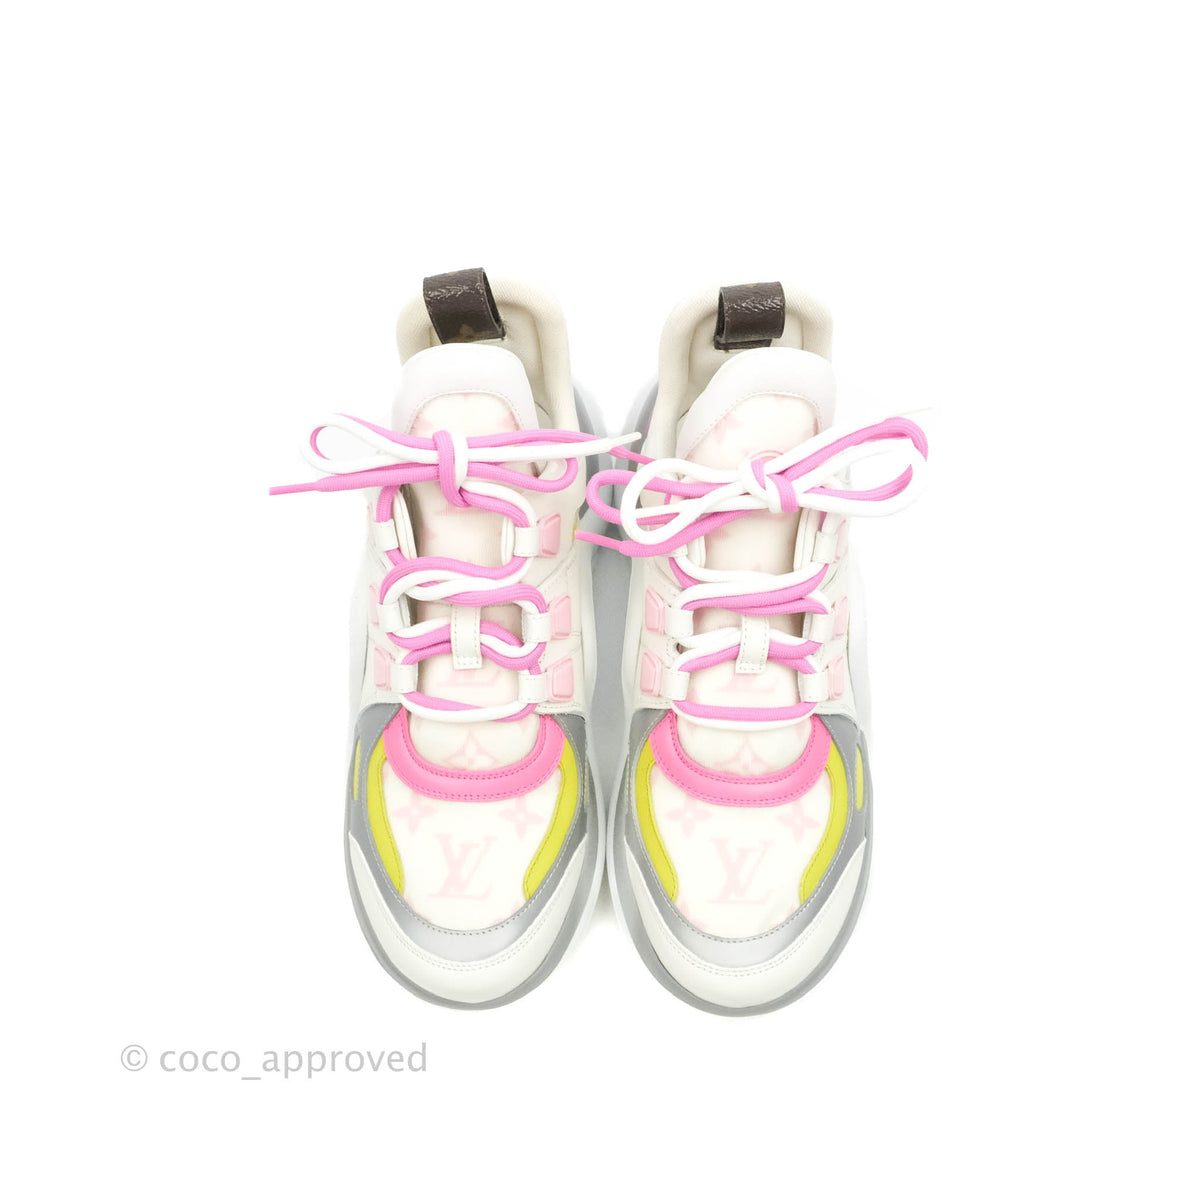 Louis Vuitton Archlight Wedge Sneakers - Pink Sneakers, Shoes - LOU798628